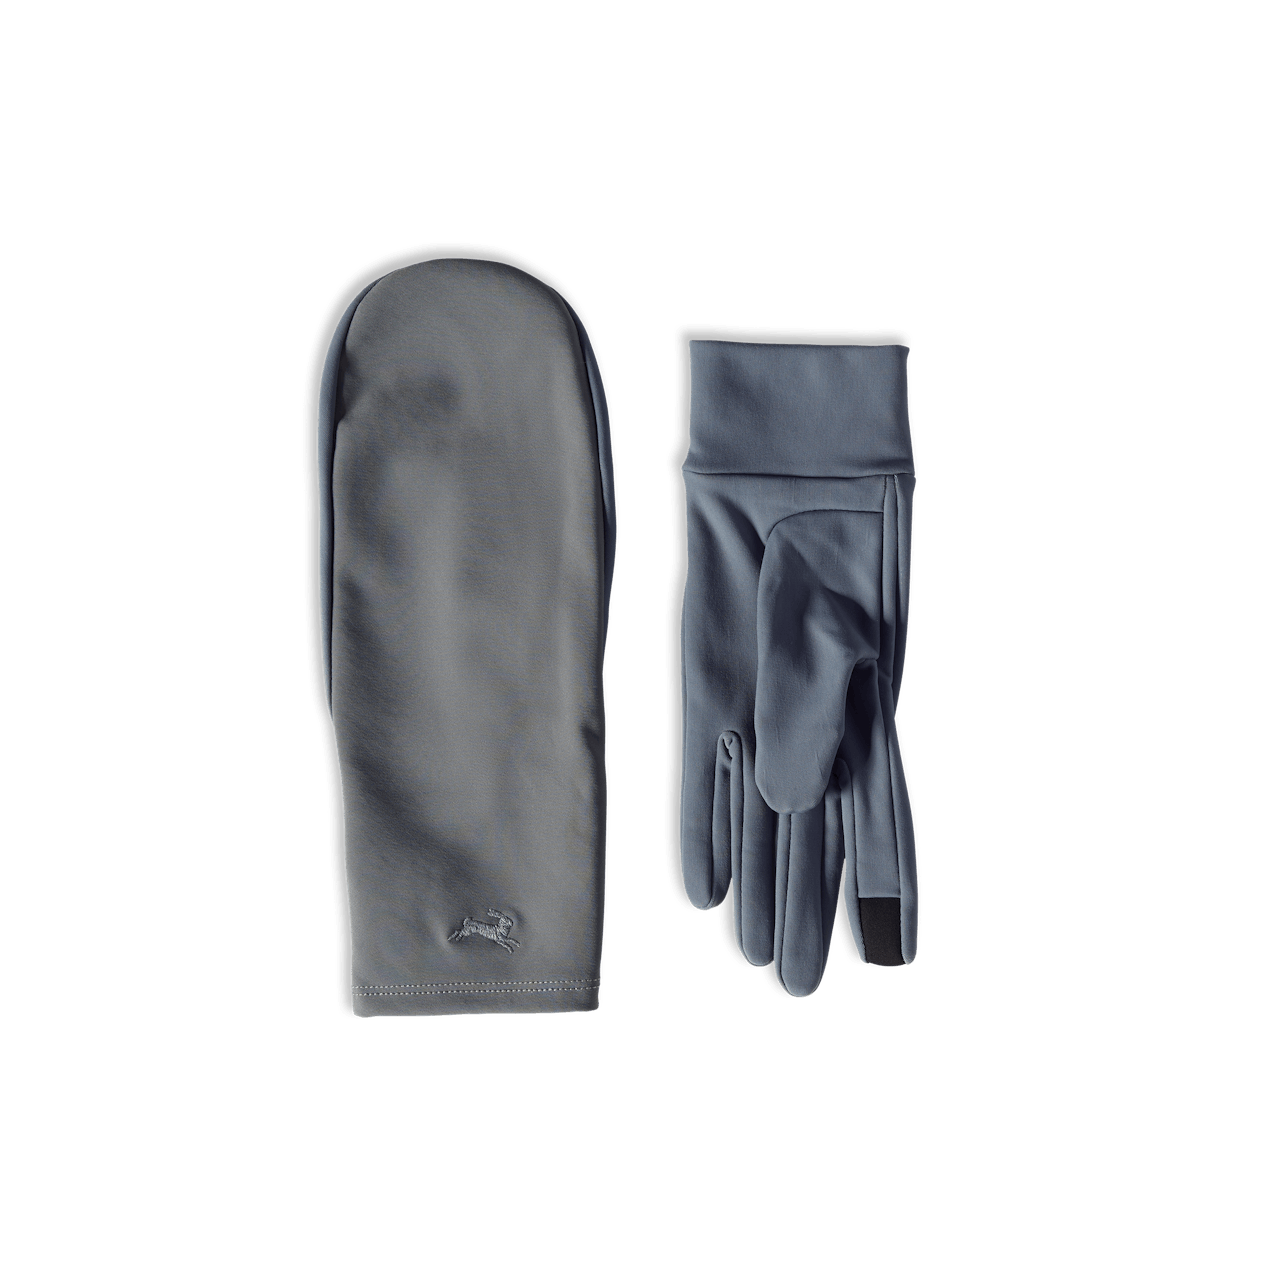 NDO 2-in-1 Mittens